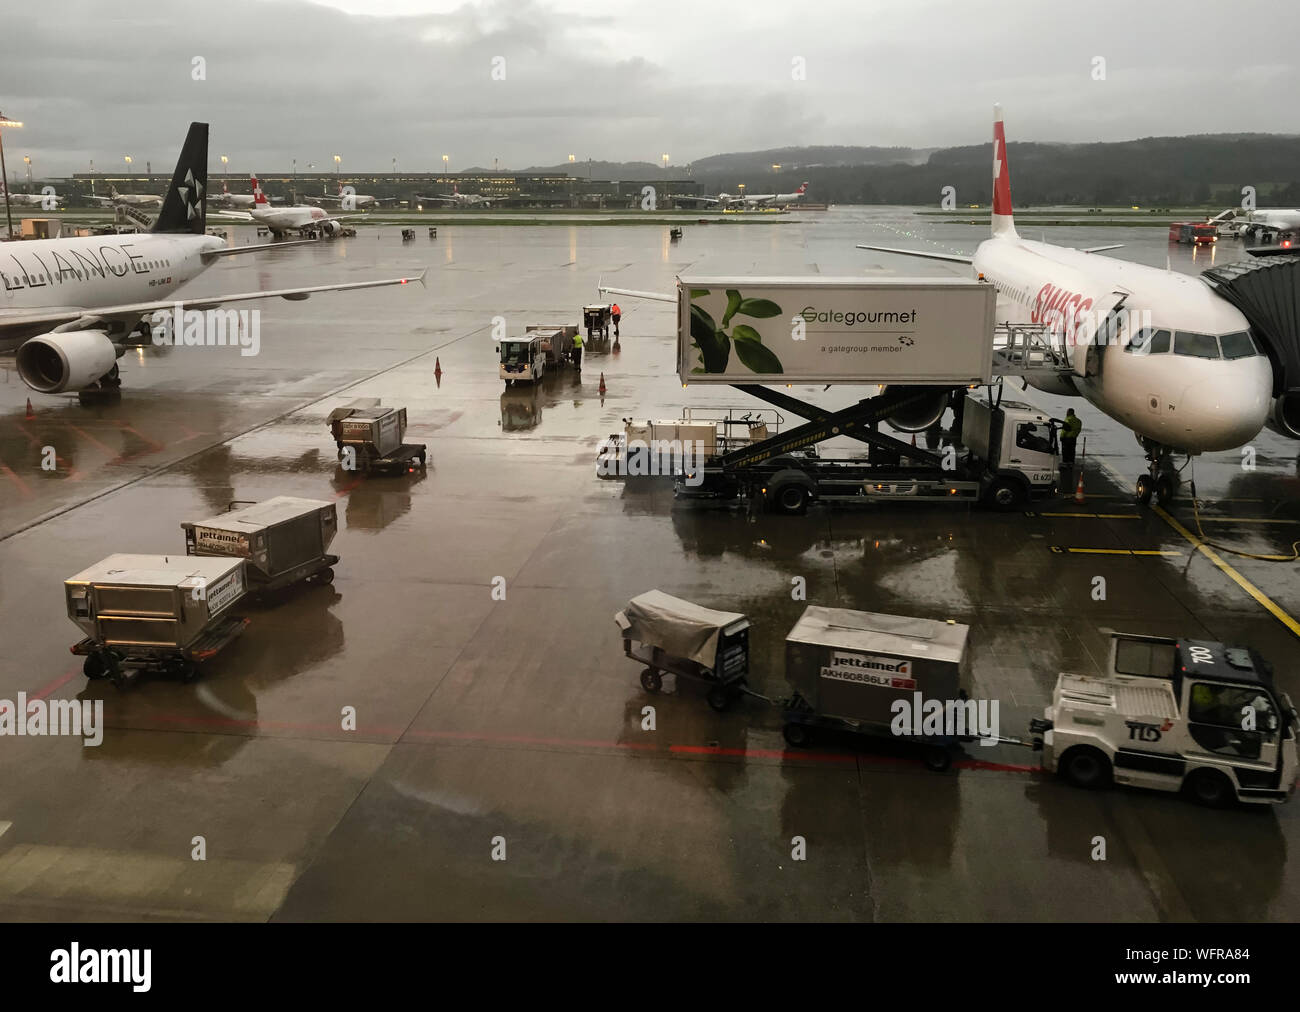 Zurich, Switzerland - 19 Aug 2019: A passenger aircraft of Swiss is loaded with cargo containers and food from caterer Gate Gourmet at Zurich airport. Stock Photo